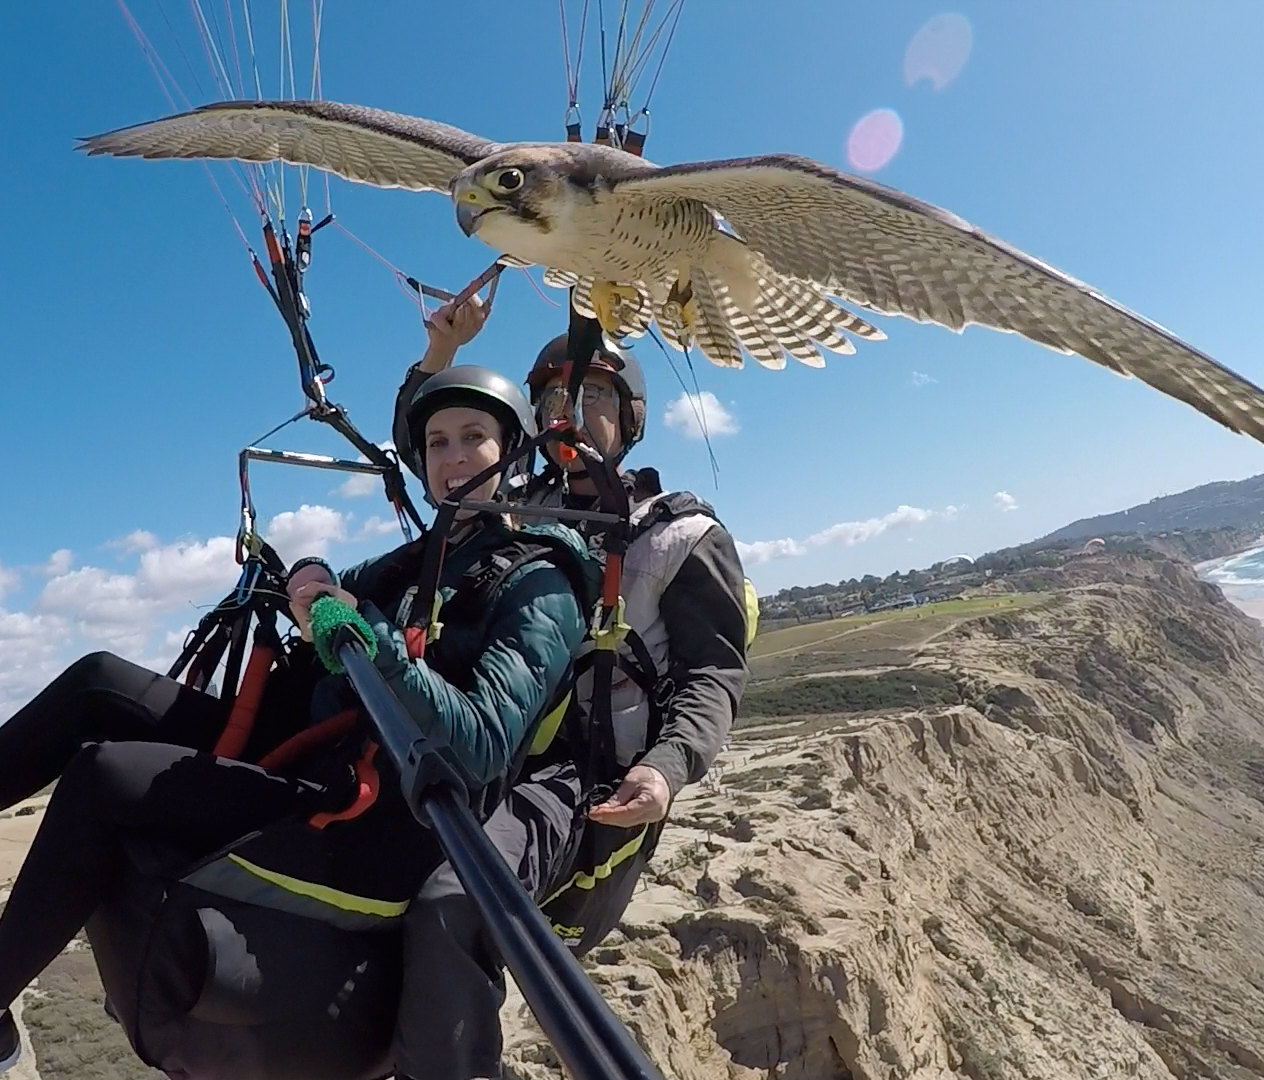 Parahawking is an epic excursion that involves tandem paragliding with a well-trained raptor tagging along. It's also a memorable way to get a bird's-eye view of San Diego's gorgeous coastal cliffs.